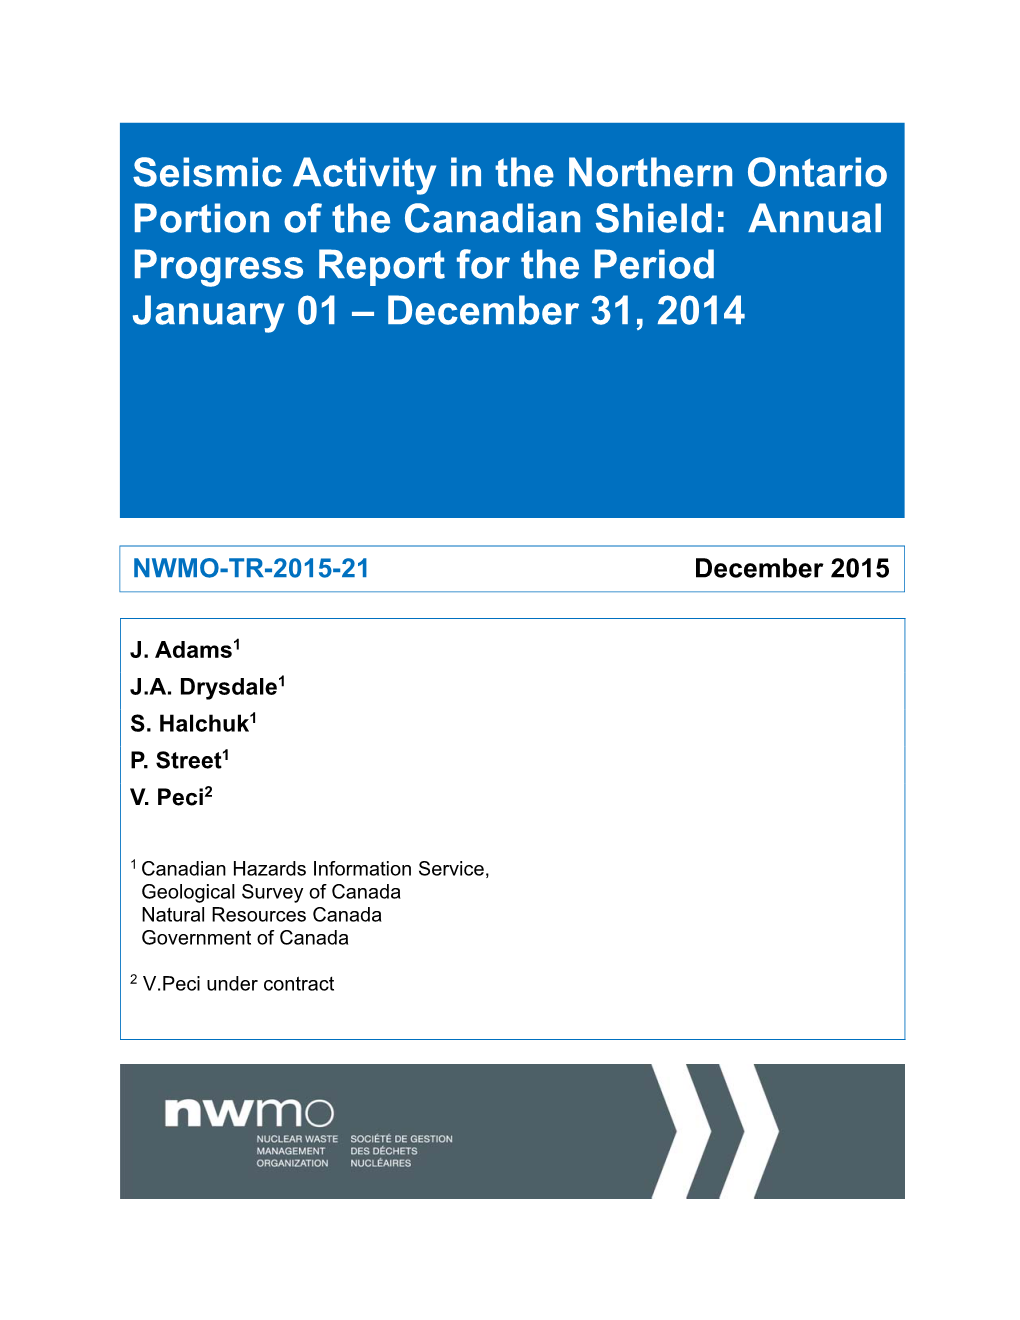 Seismic Activity in the Northern Ontario Portion of the Canadian Shield: Annual Progress Report for the Period January 01 – December 31, 2014